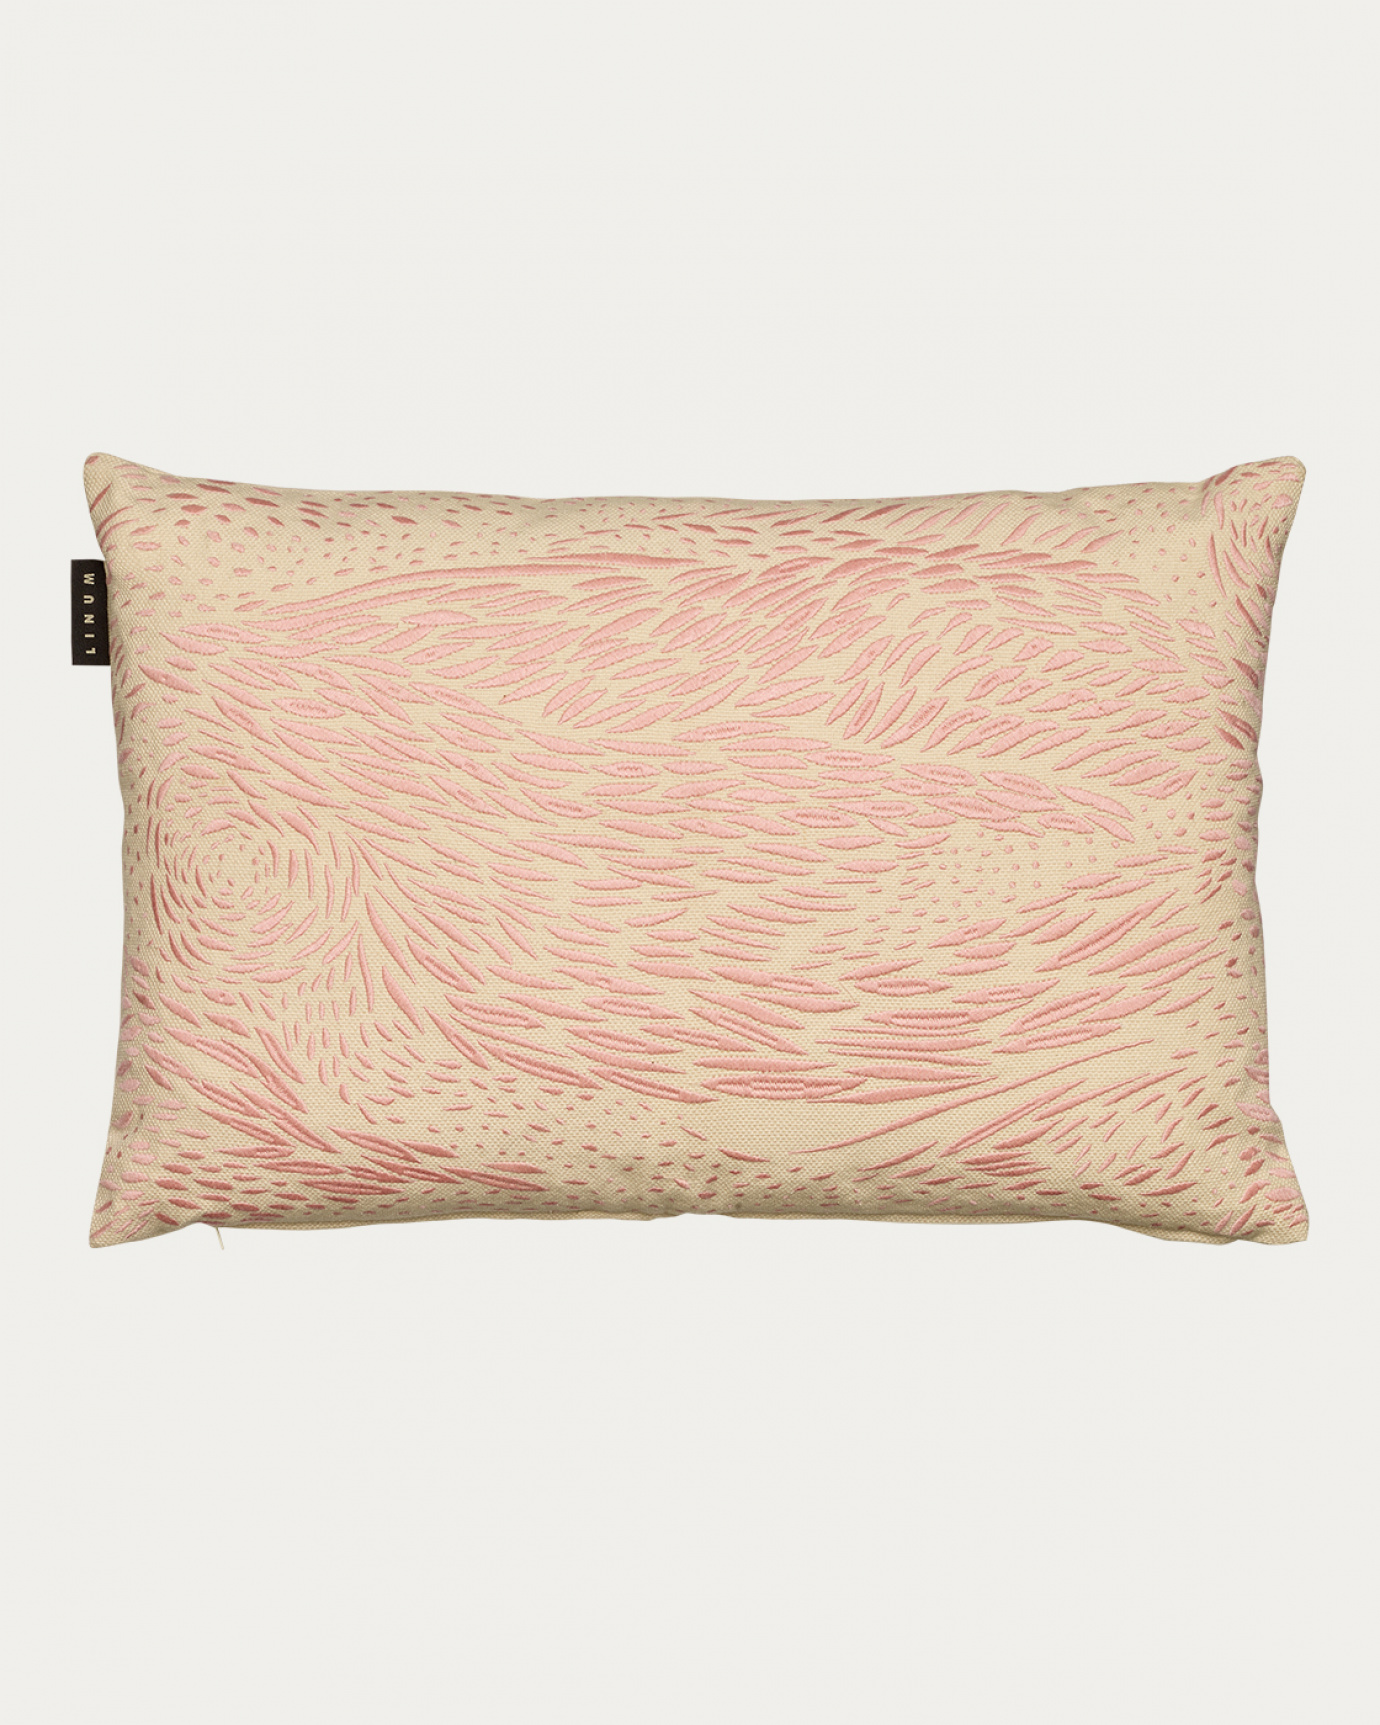 STROMBOLI Cushion cover 40x60 cm Misty grey pink in the group ASSORTMENT / OUTLET at LINUM DESIGN (23STR04600B84)